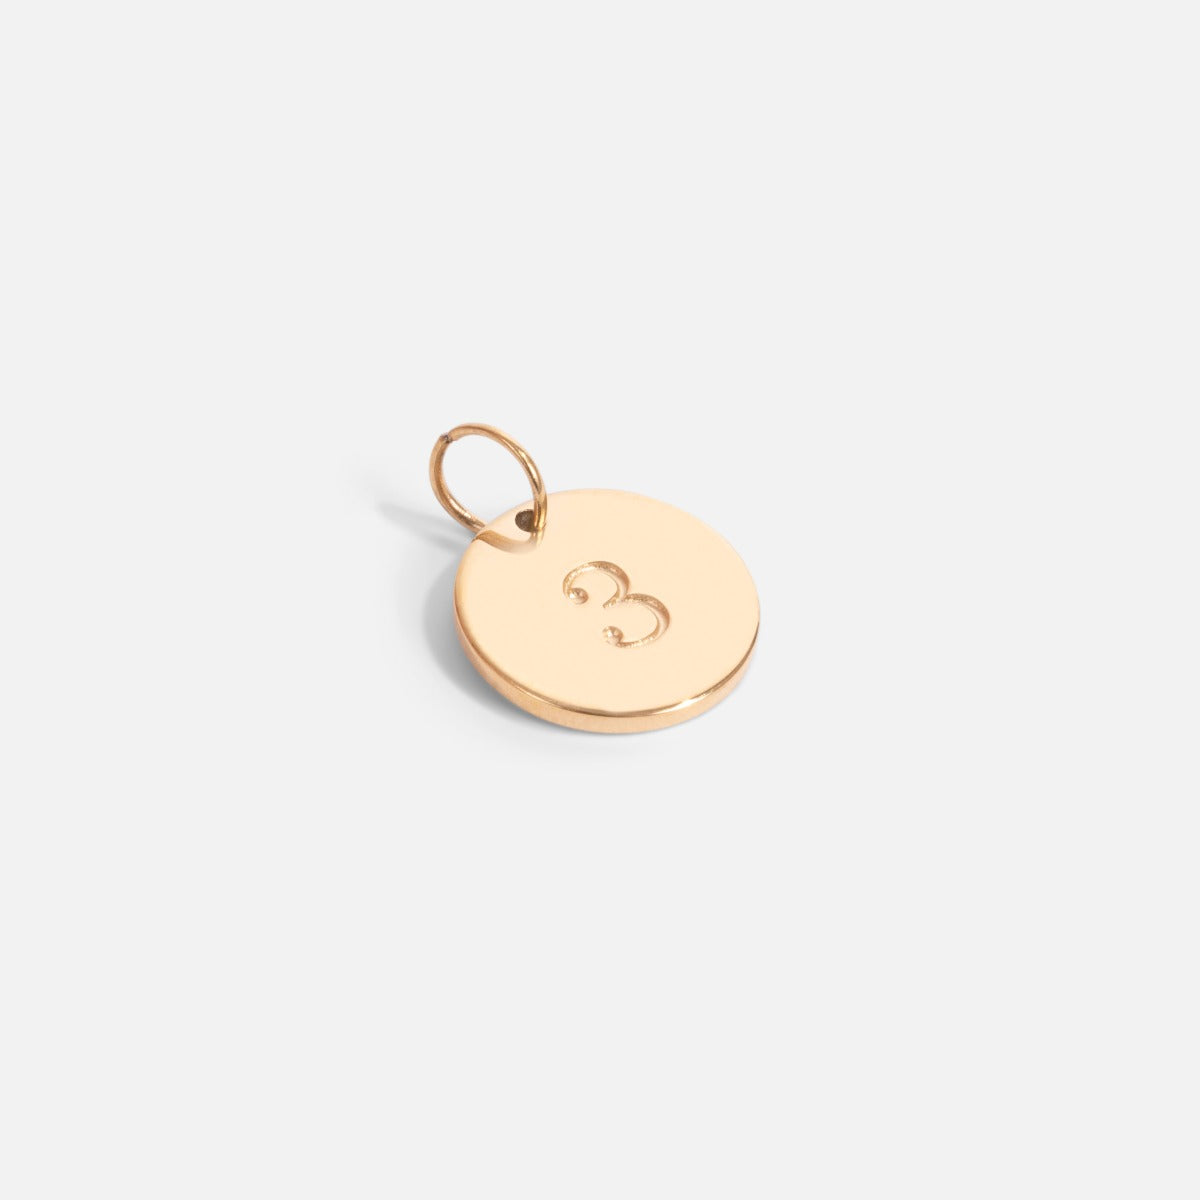 Small golden charm engraved with the number "3"   